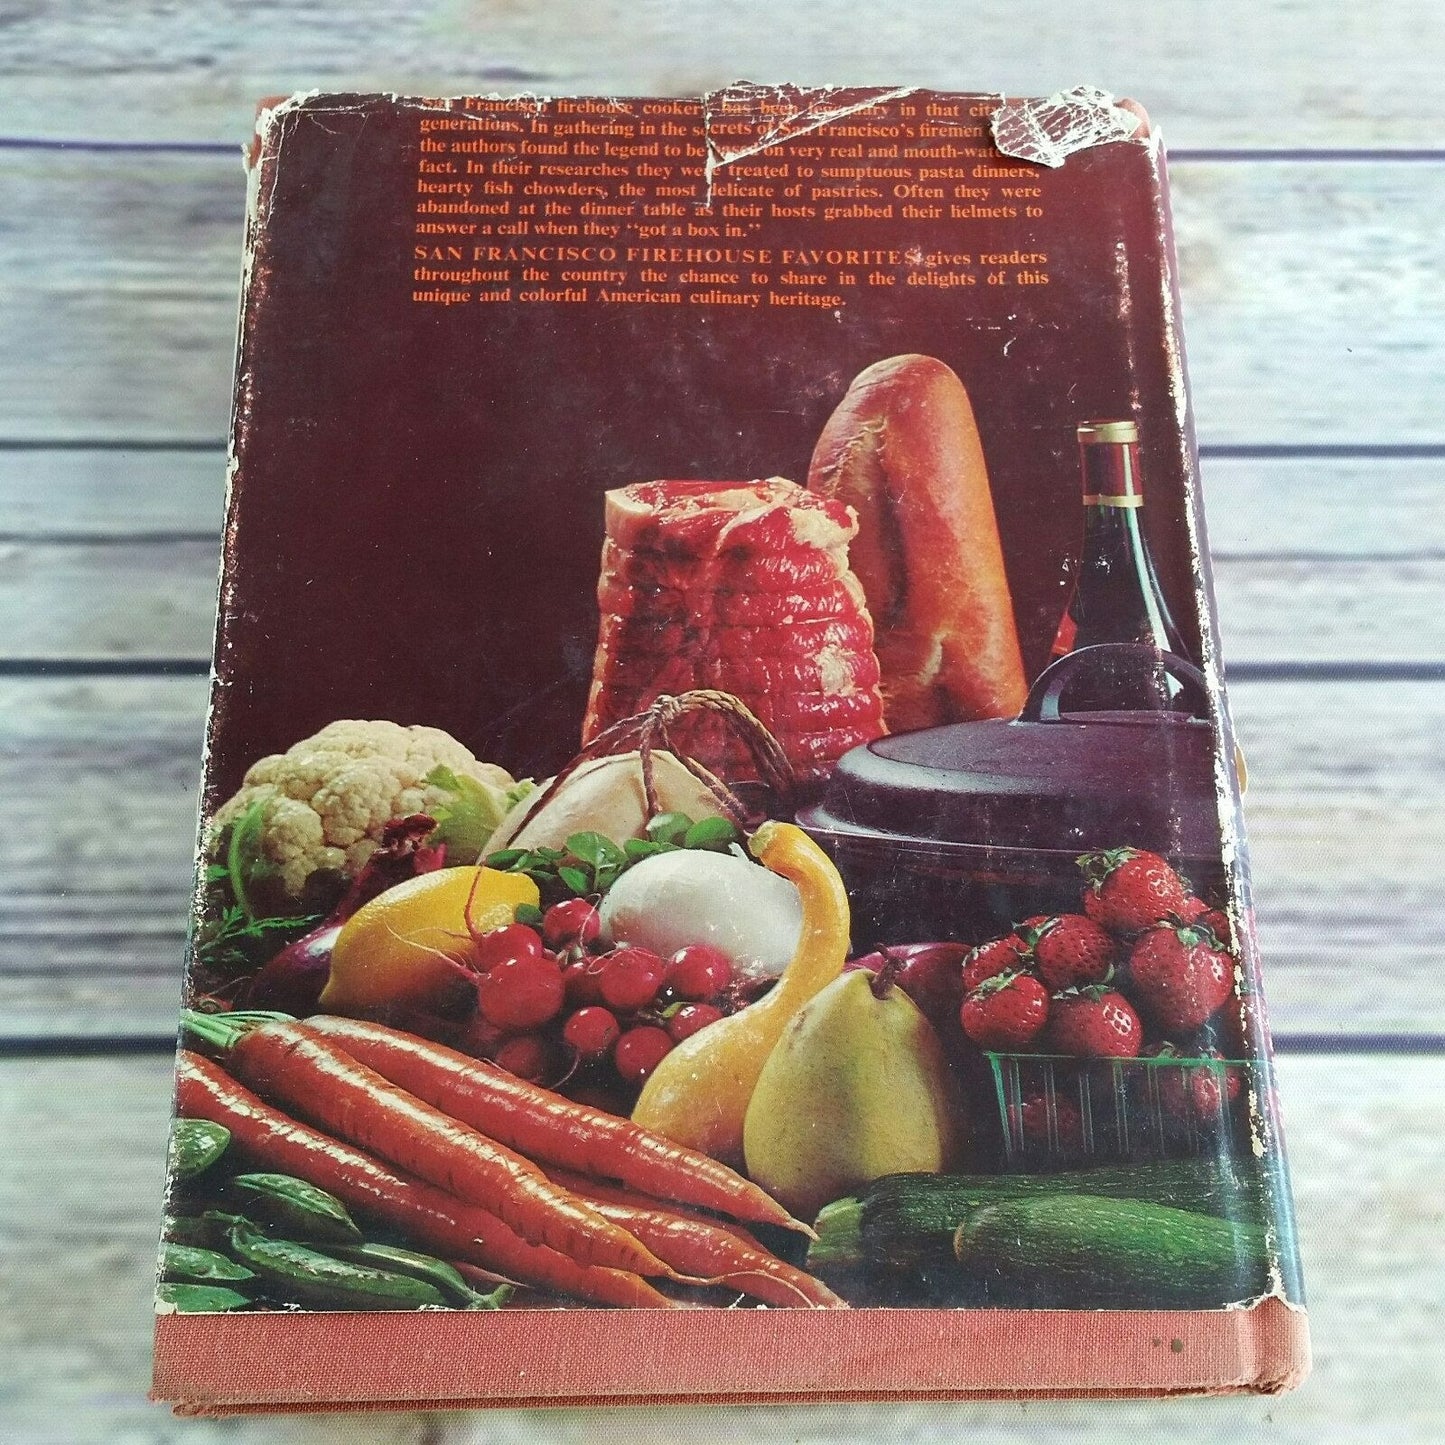 Vintage Cookbook San Francisco Firehouse Favorites 1965 Recipes Old Photos Hardcover with Dust Jacket First Printing